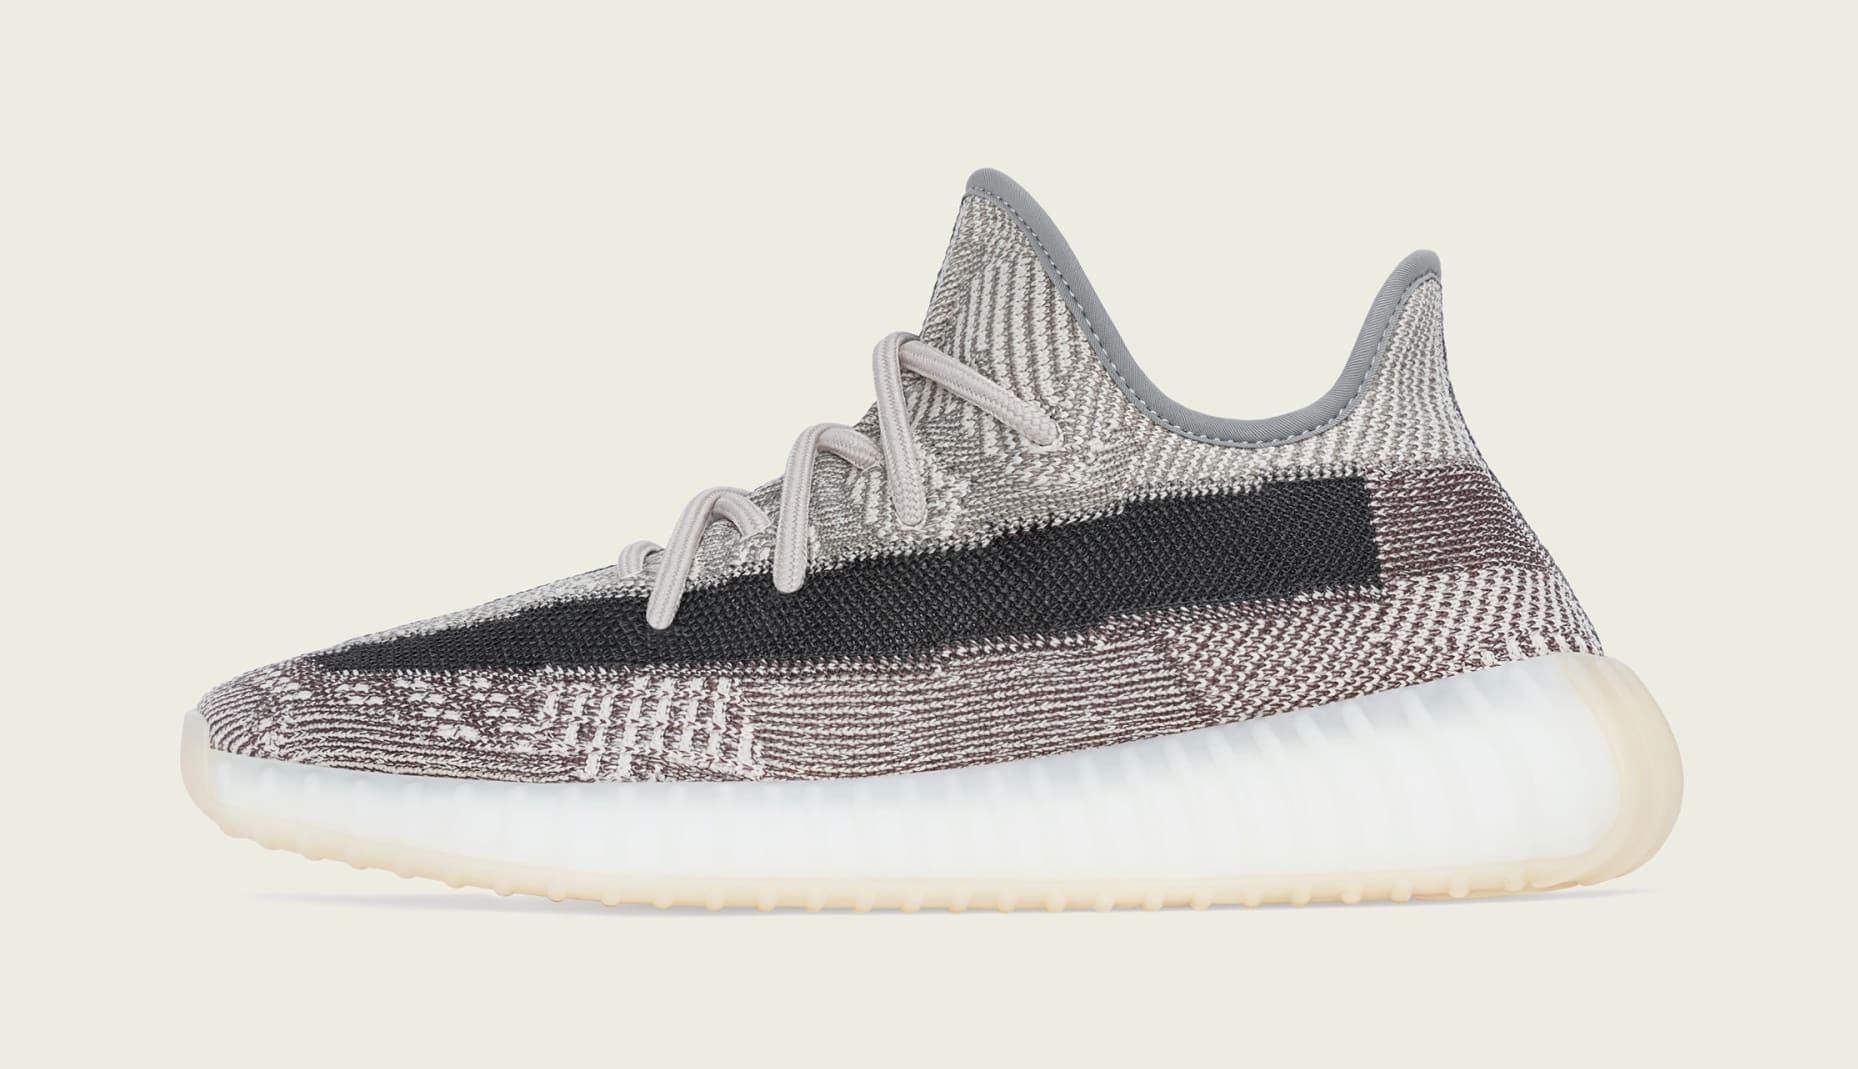 Adidas Yeezy Boost 350 V2 'Zyon' FZ1267 Lateral